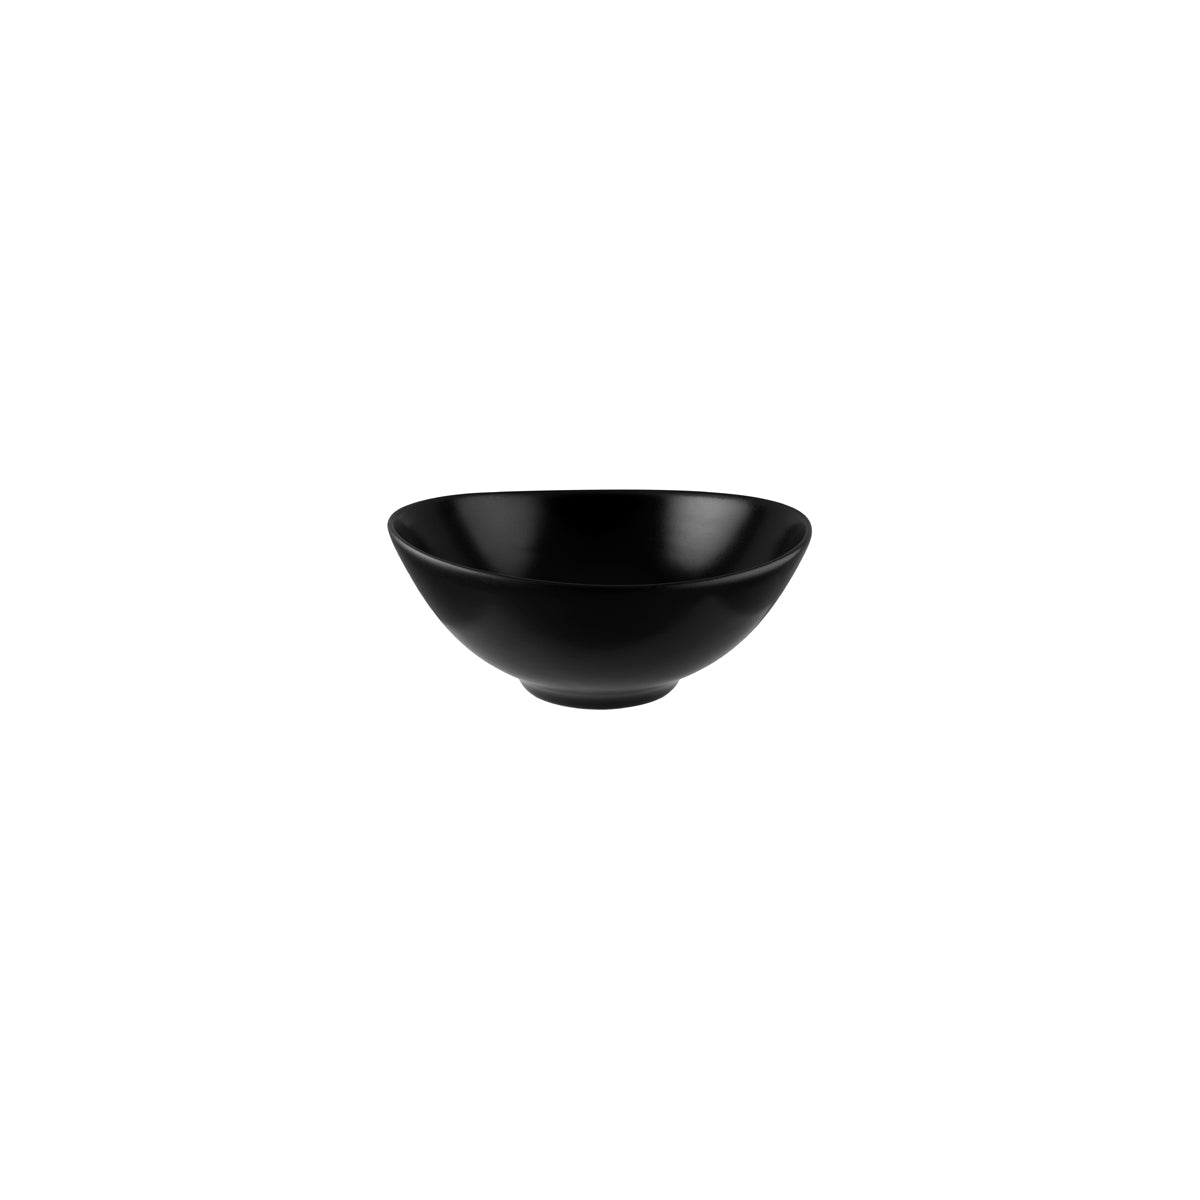 Notte Agora Round Bowl 190mm, 1.04Lt : Pack of 6